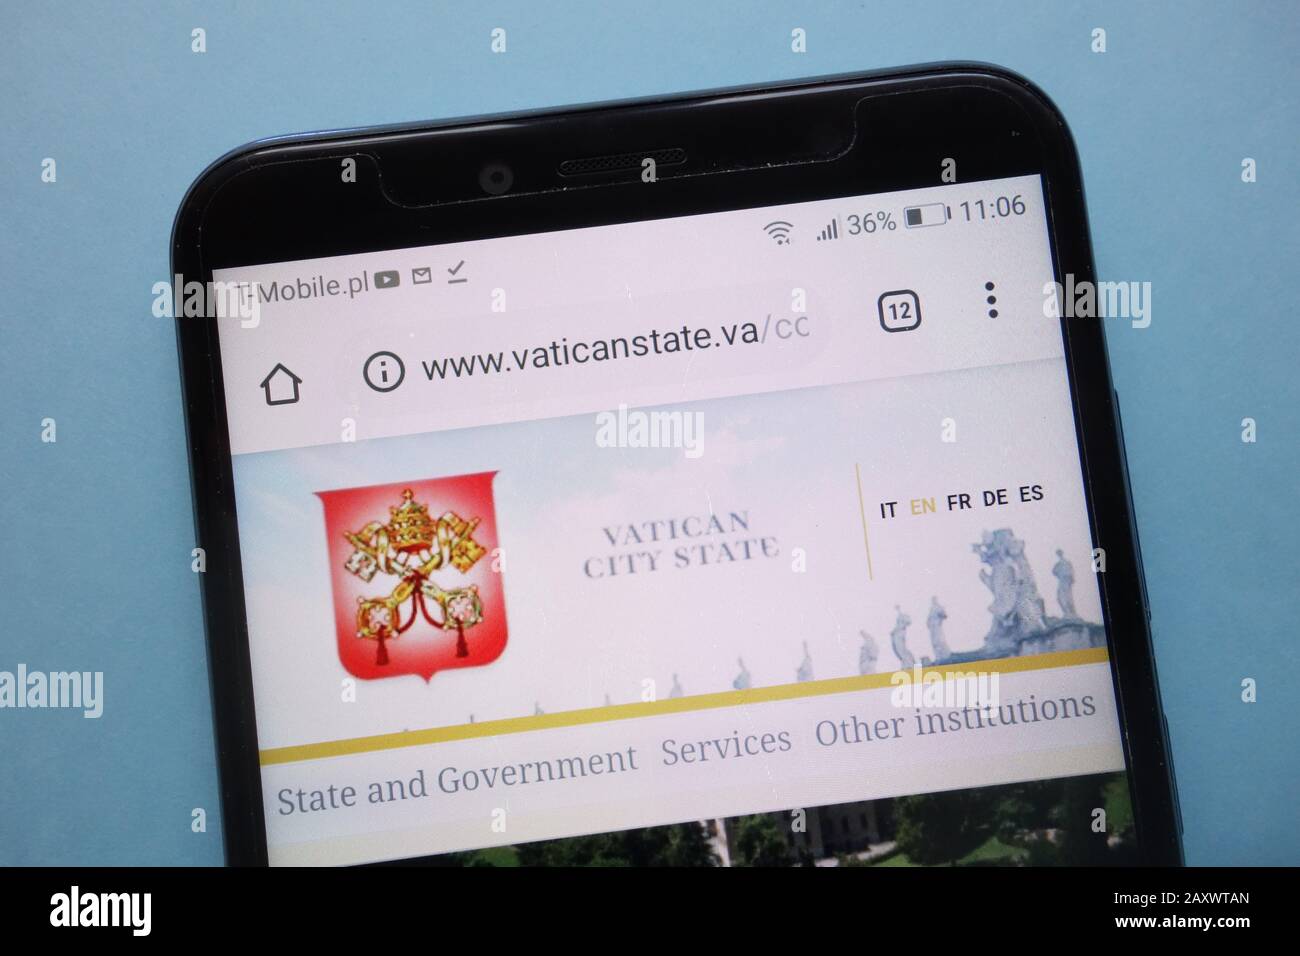 Vatican City State website displayed on smartphone Stock Photo